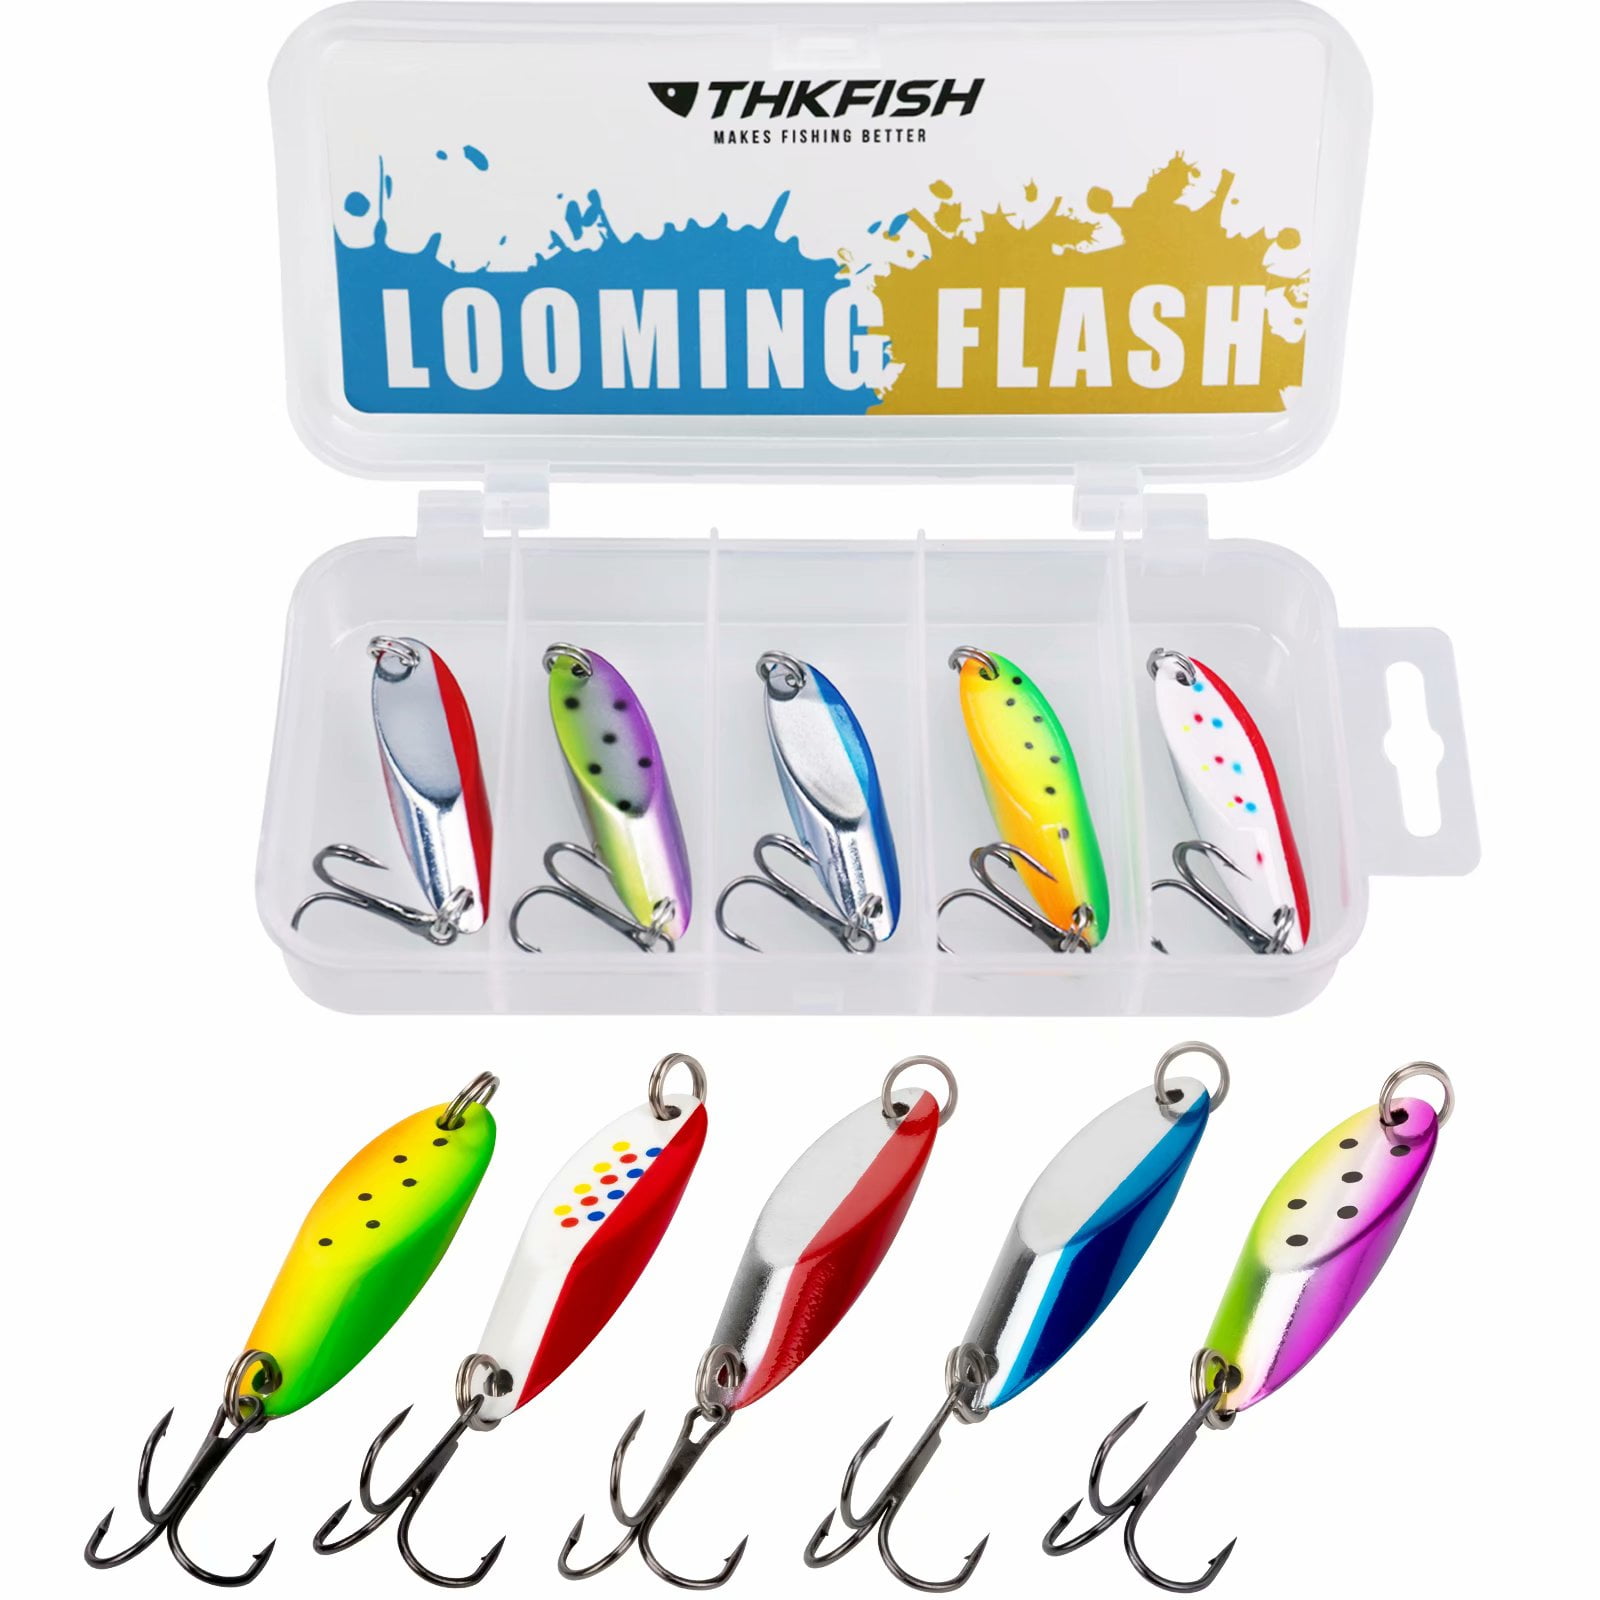 THKFISH Fishing Lures Fishing Spoons Lures Trout Lures for Trout pike bass Crappie Walleye 3.5g 3/8oz 1/5oz 5.5g 10.5g 14.5g 5pcs 1/8oz 21.5g 7.5g 3/4oz 1/2oz 1/4oz 